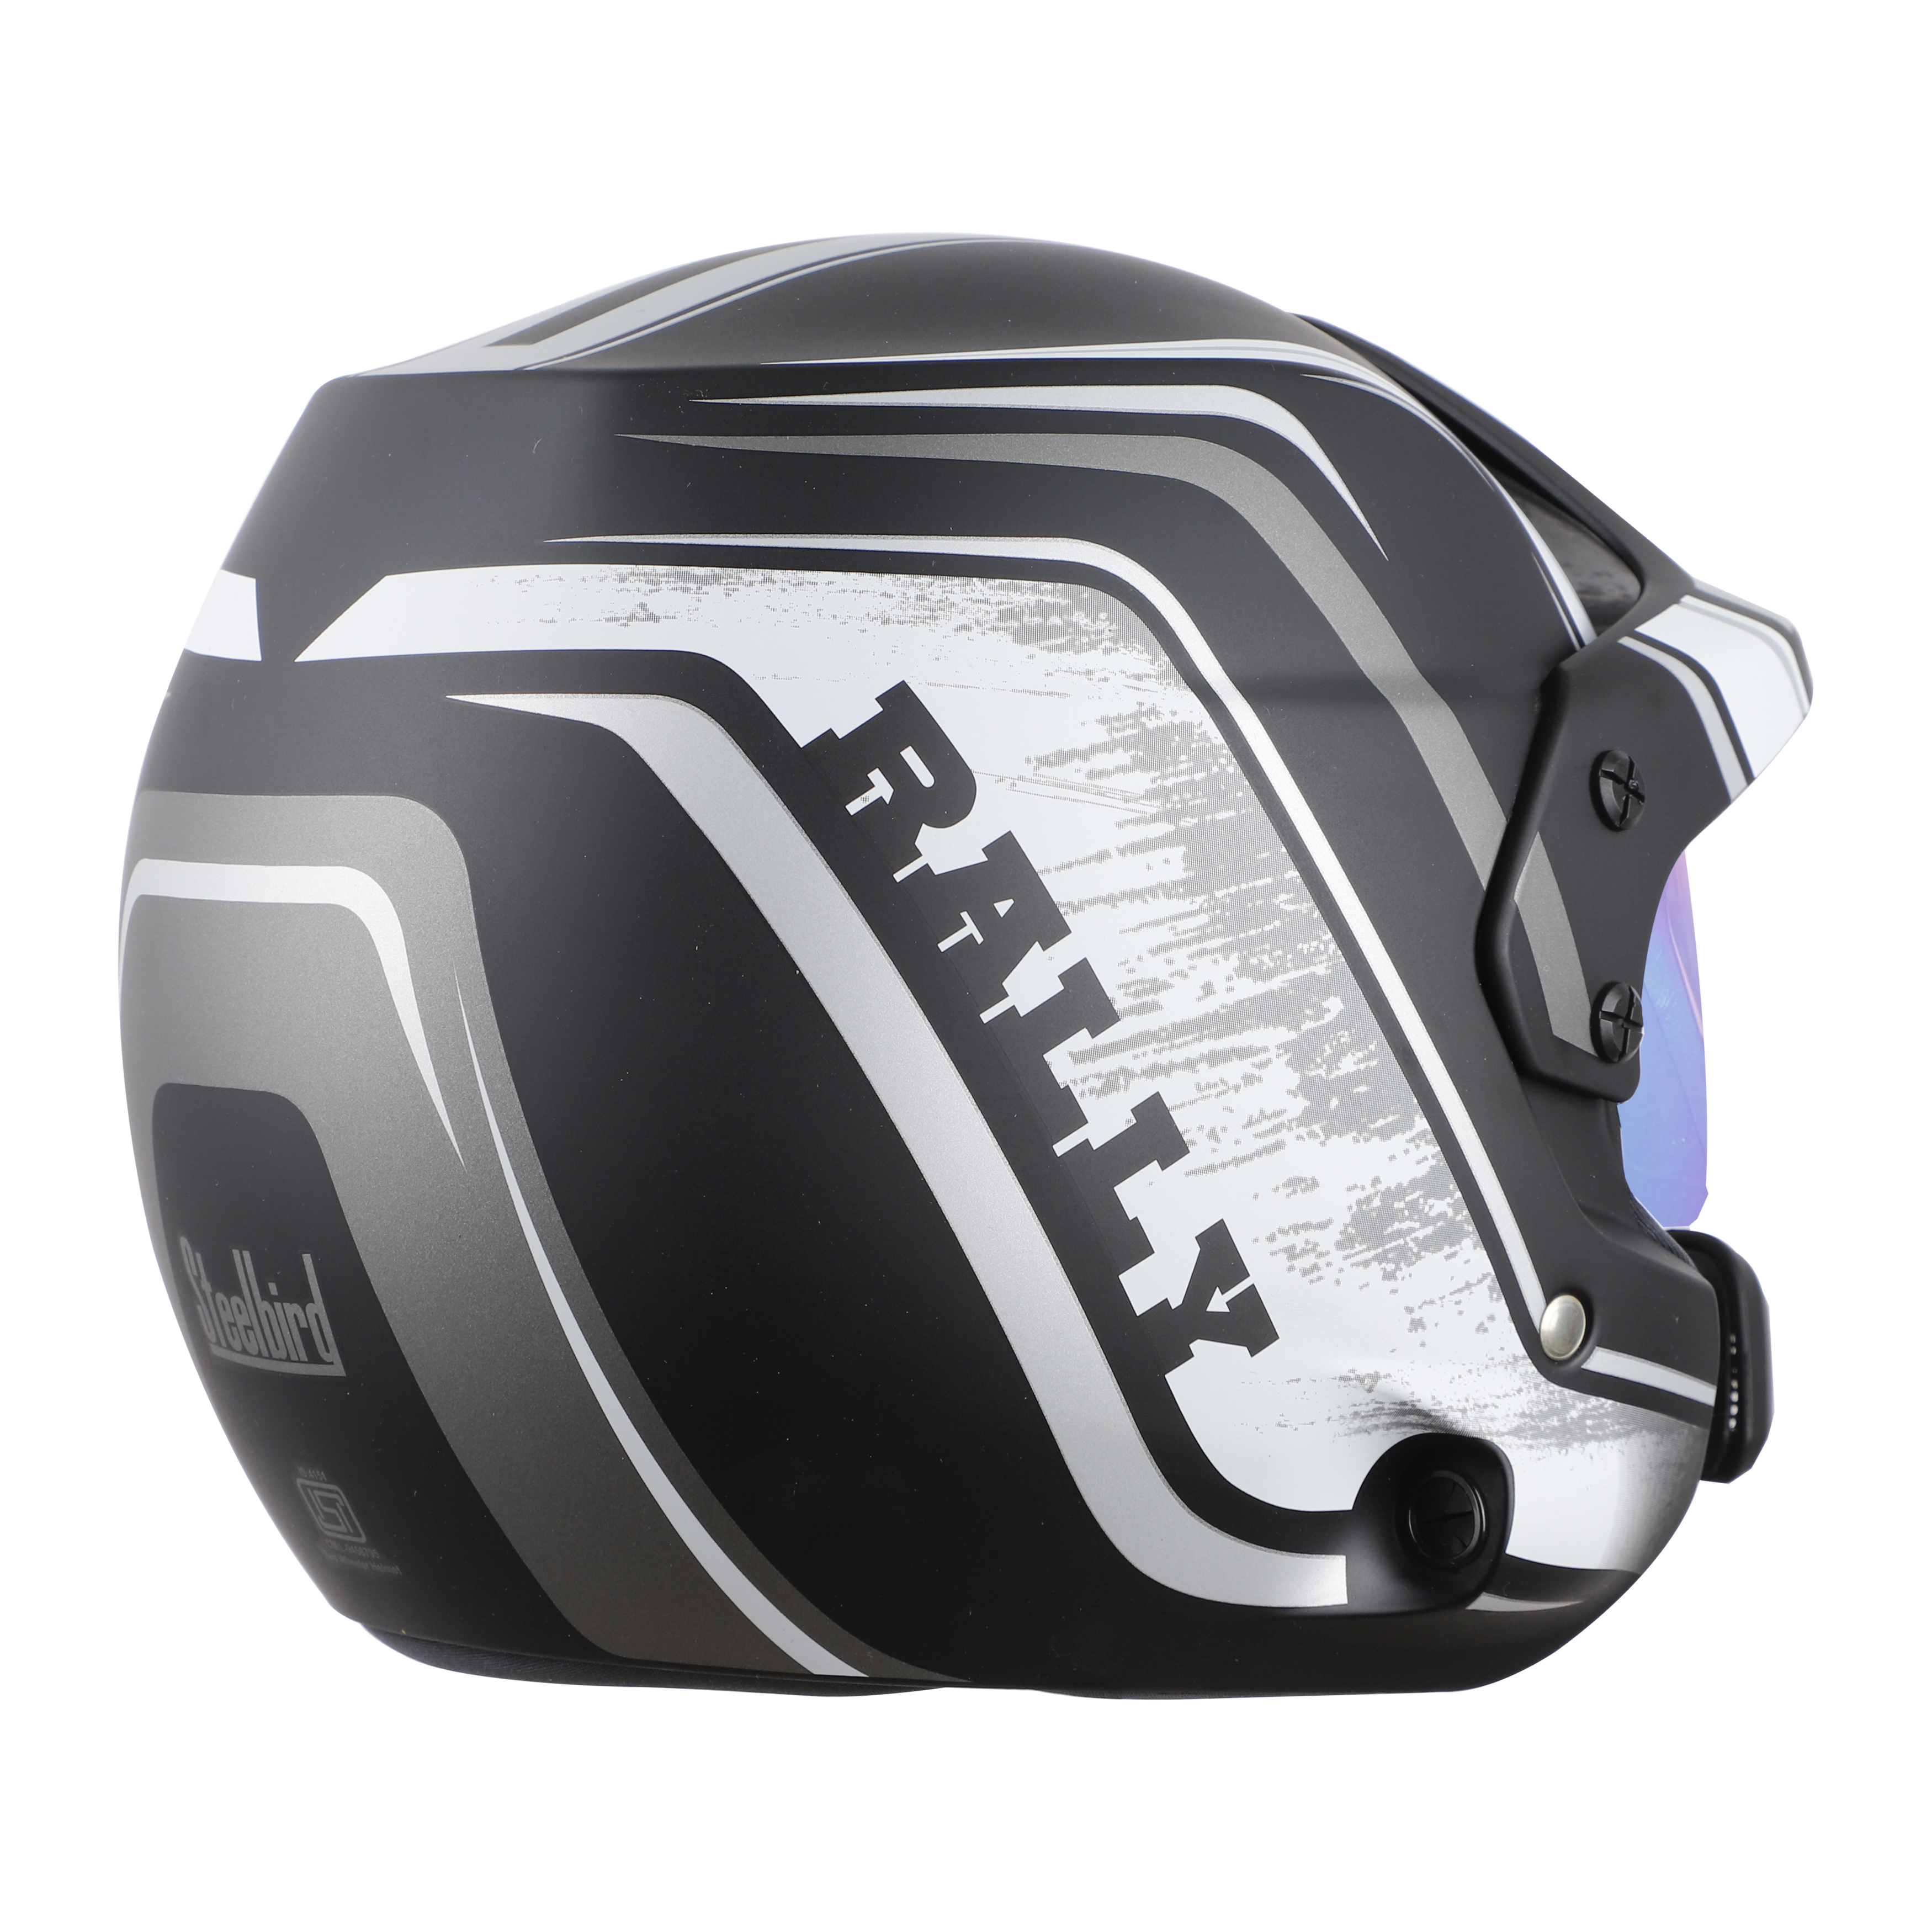 SB-51 RALLY RUT MAT BLACK WITH GREY ( FITTED WITH CLEAR VISOR EXTRA CHROME RAINBOW VISOR FREE)